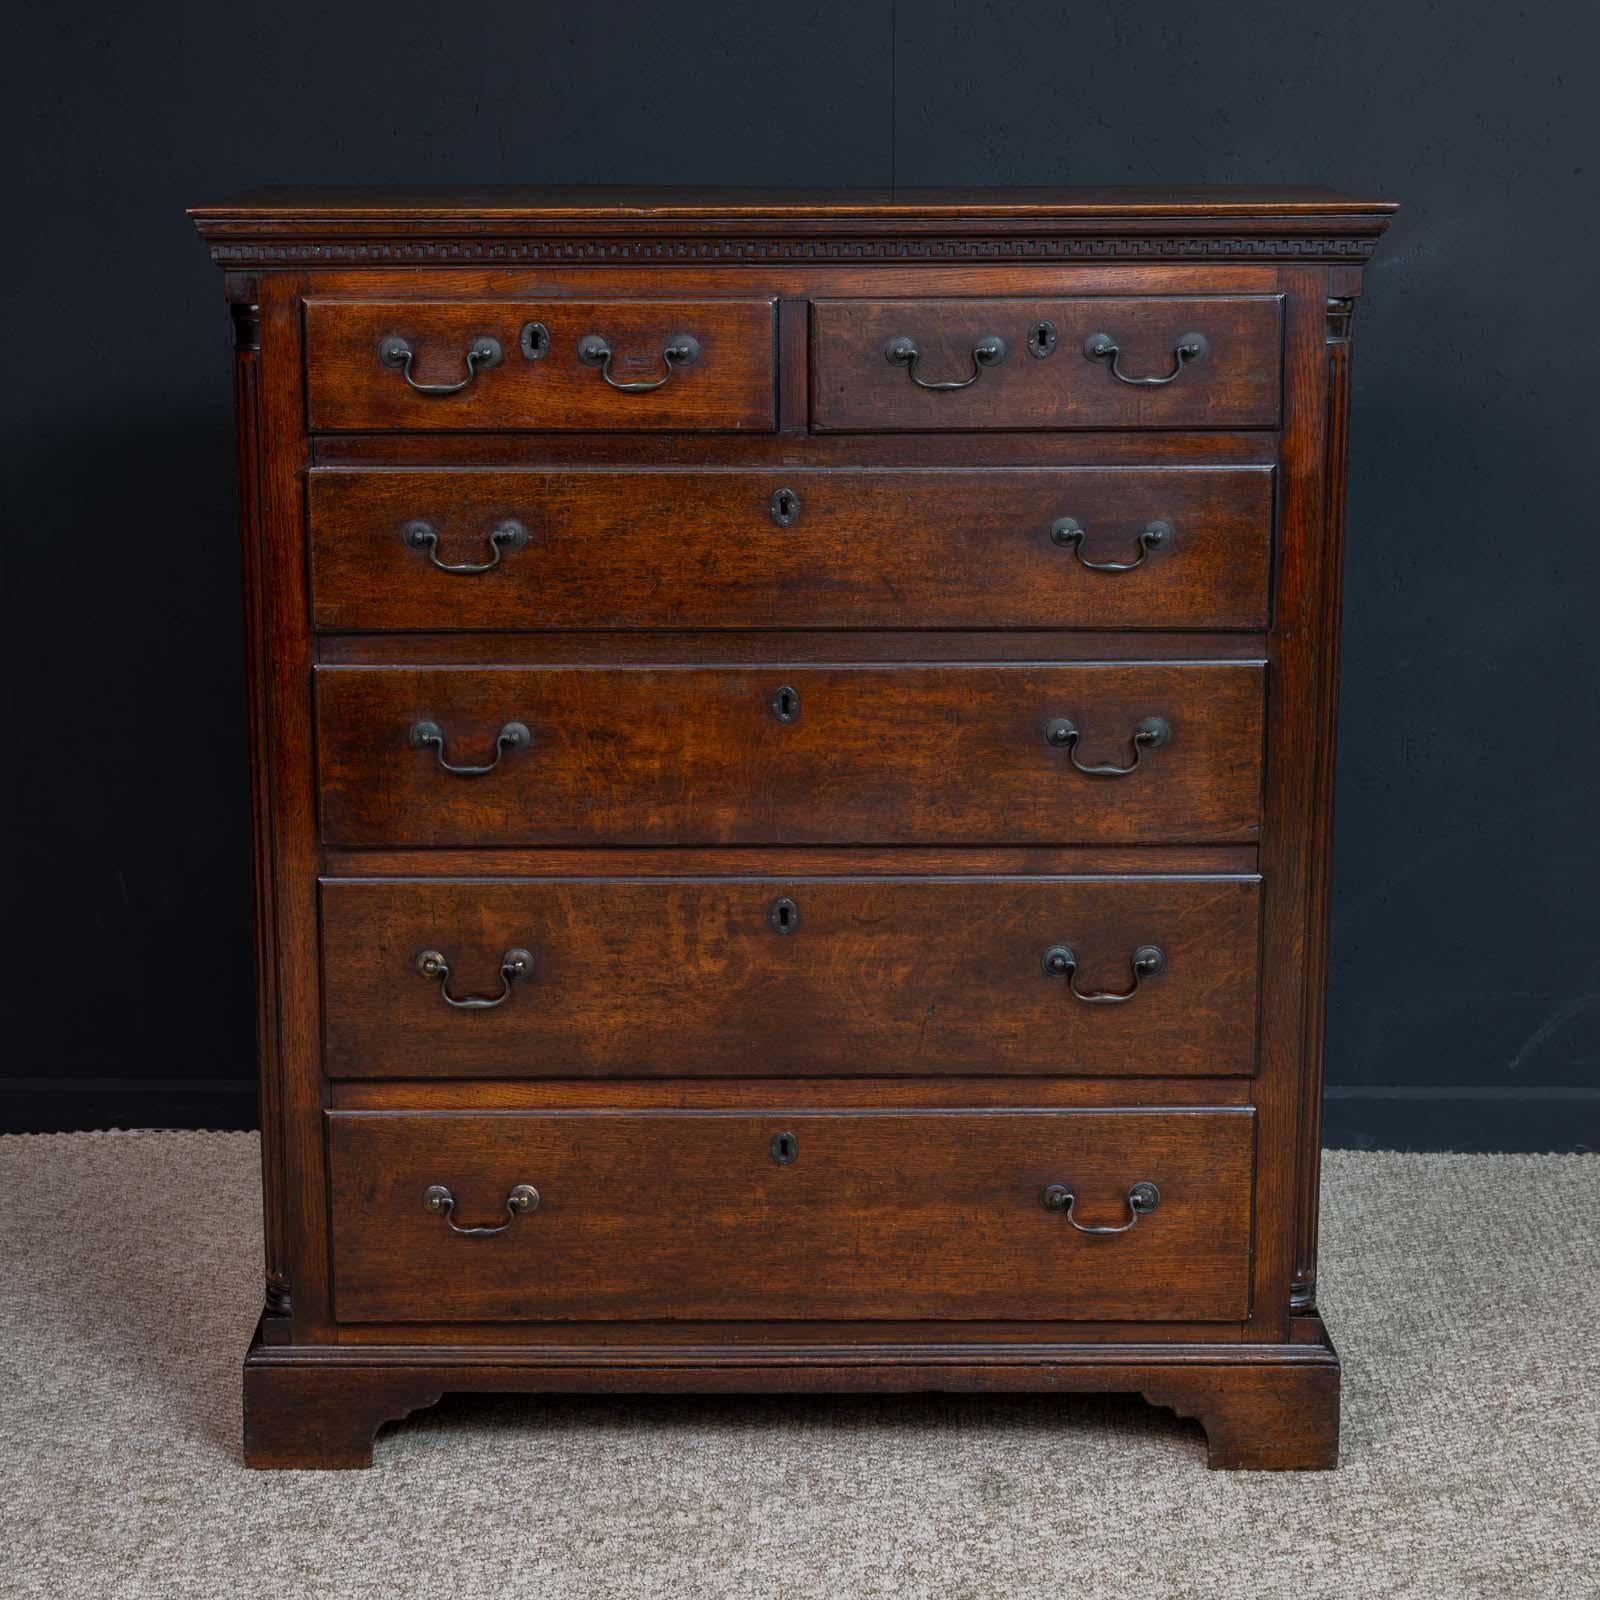 A superb mid-18th century oak chest of drawers of a beautiful rich color and patina. Very original with only minor repairs over it's 270 years. Sat on bracket feet with reeded canted corners and lovely terminals. Just beneath the top is a blind fret